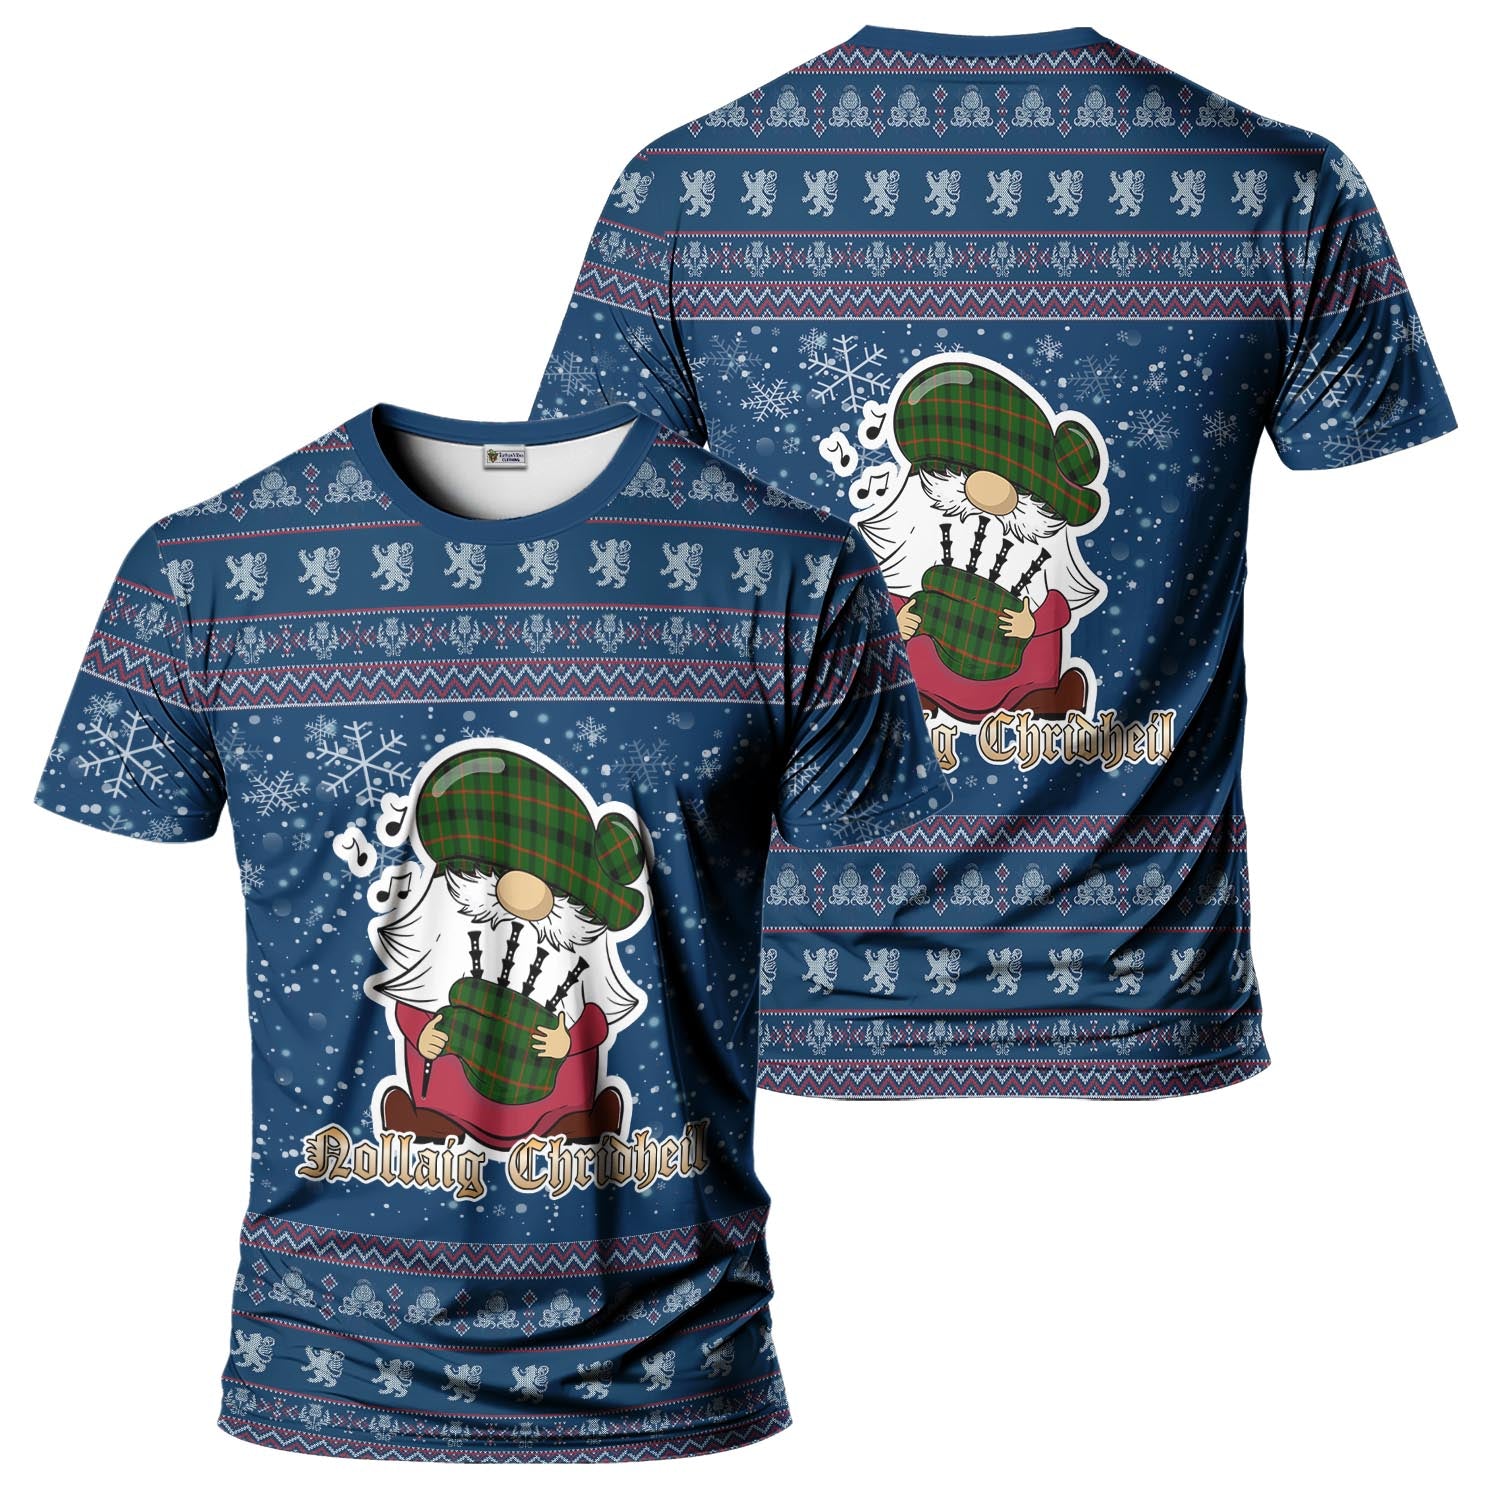 Kincaid Modern Clan Christmas Family T-Shirt with Funny Gnome Playing Bagpipes Kid's Shirt Blue - Tartanvibesclothing